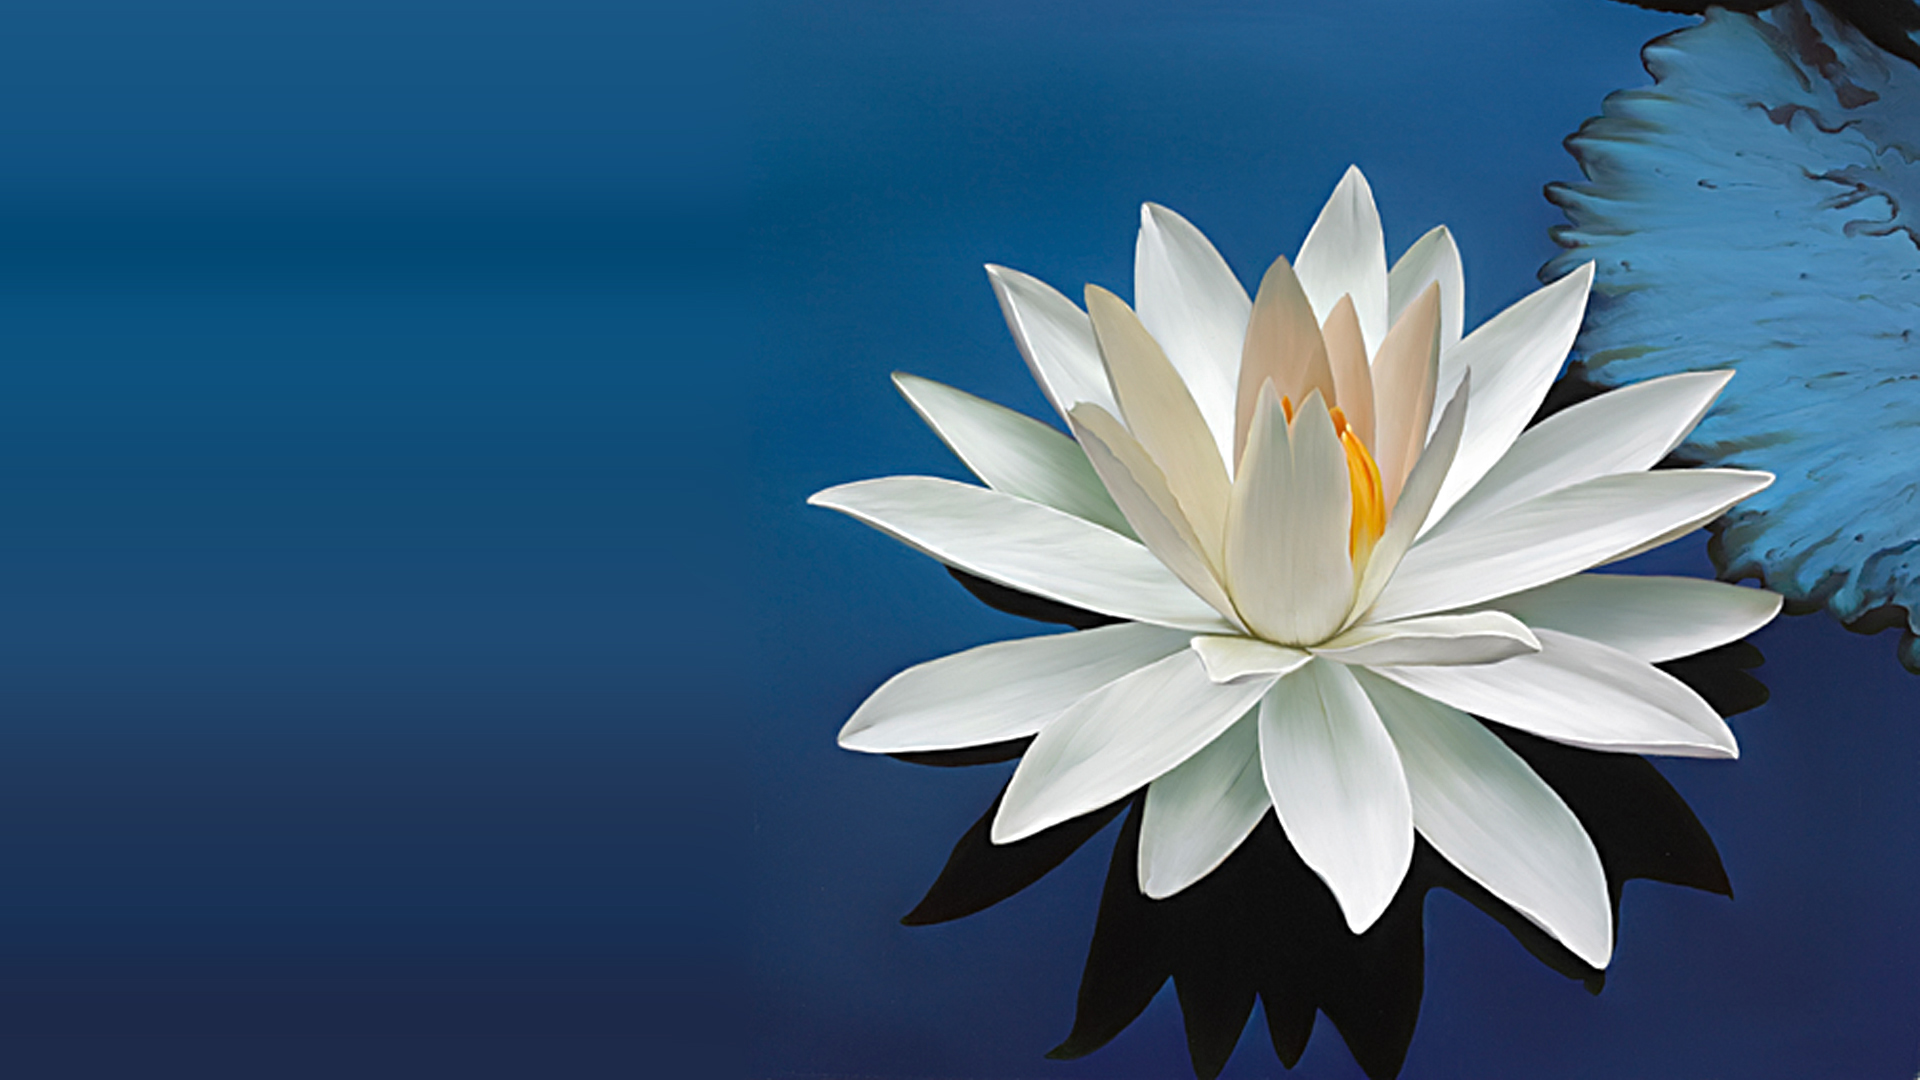 Nature Wallpaper with Beautiful White Lotus Flower - HD Wallpapers